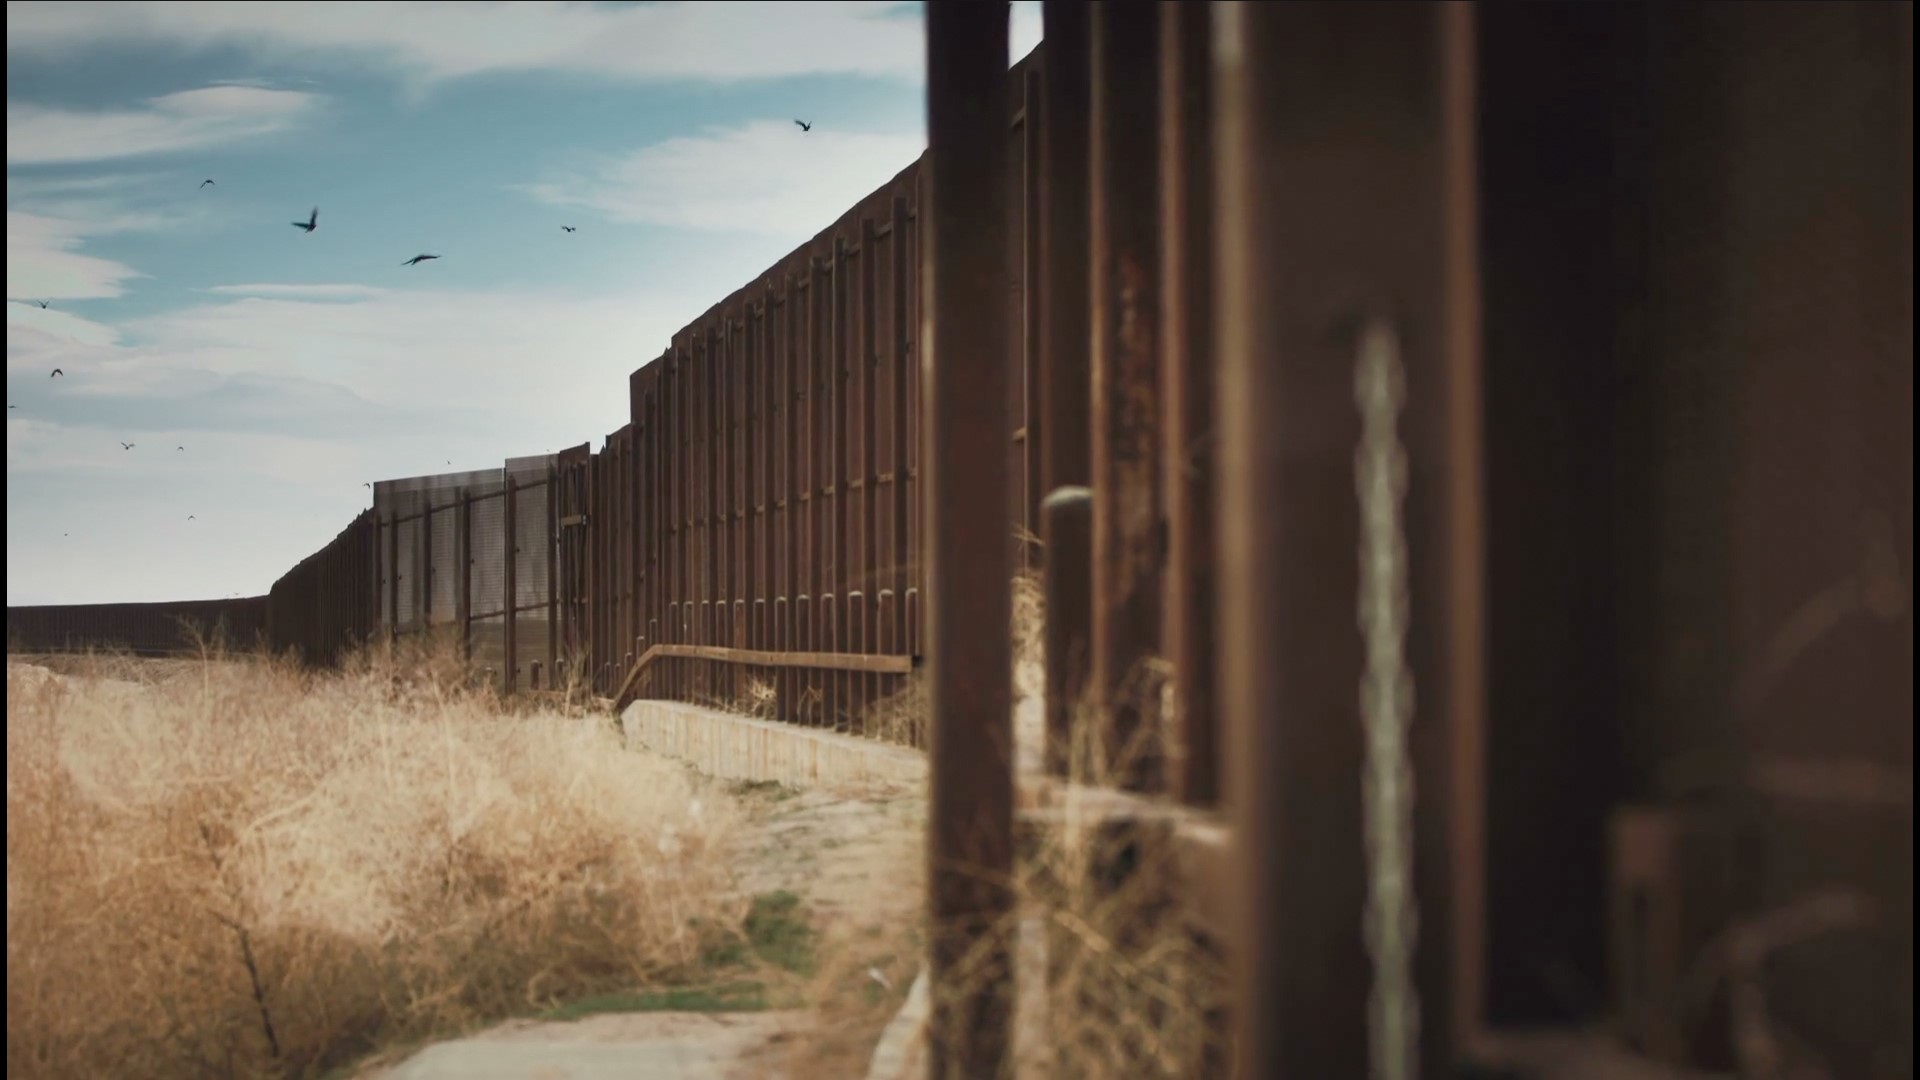 Homeland Security is waiving some federal laws to allow the Trump administration to build the border wall at a faster rate. Veuer's Justin Kircher has the story.